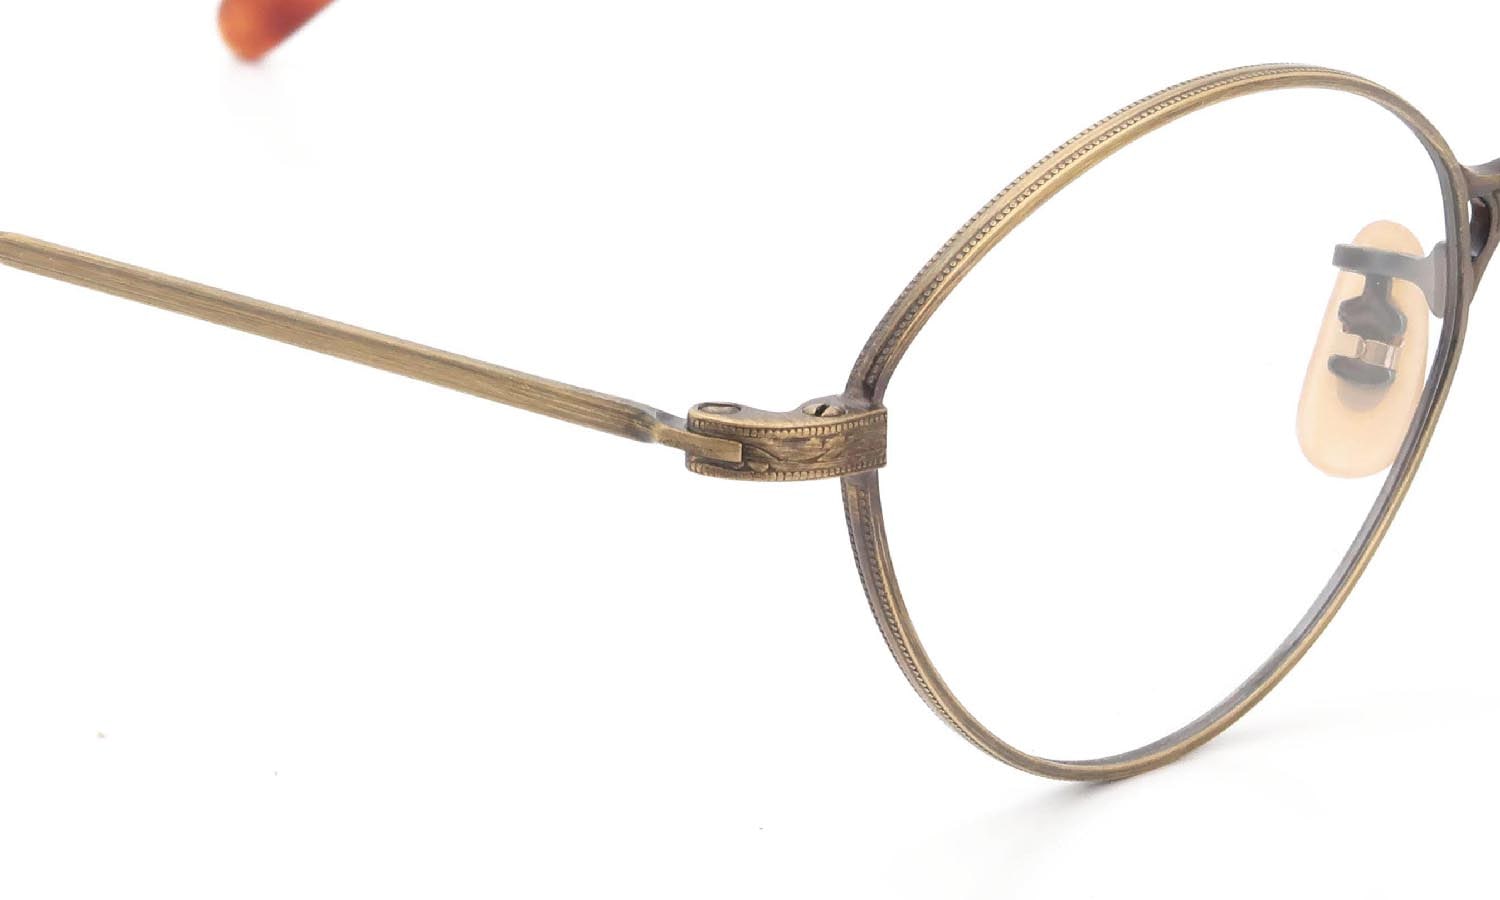 OLIVER PEOPLES 1990's Madison AG